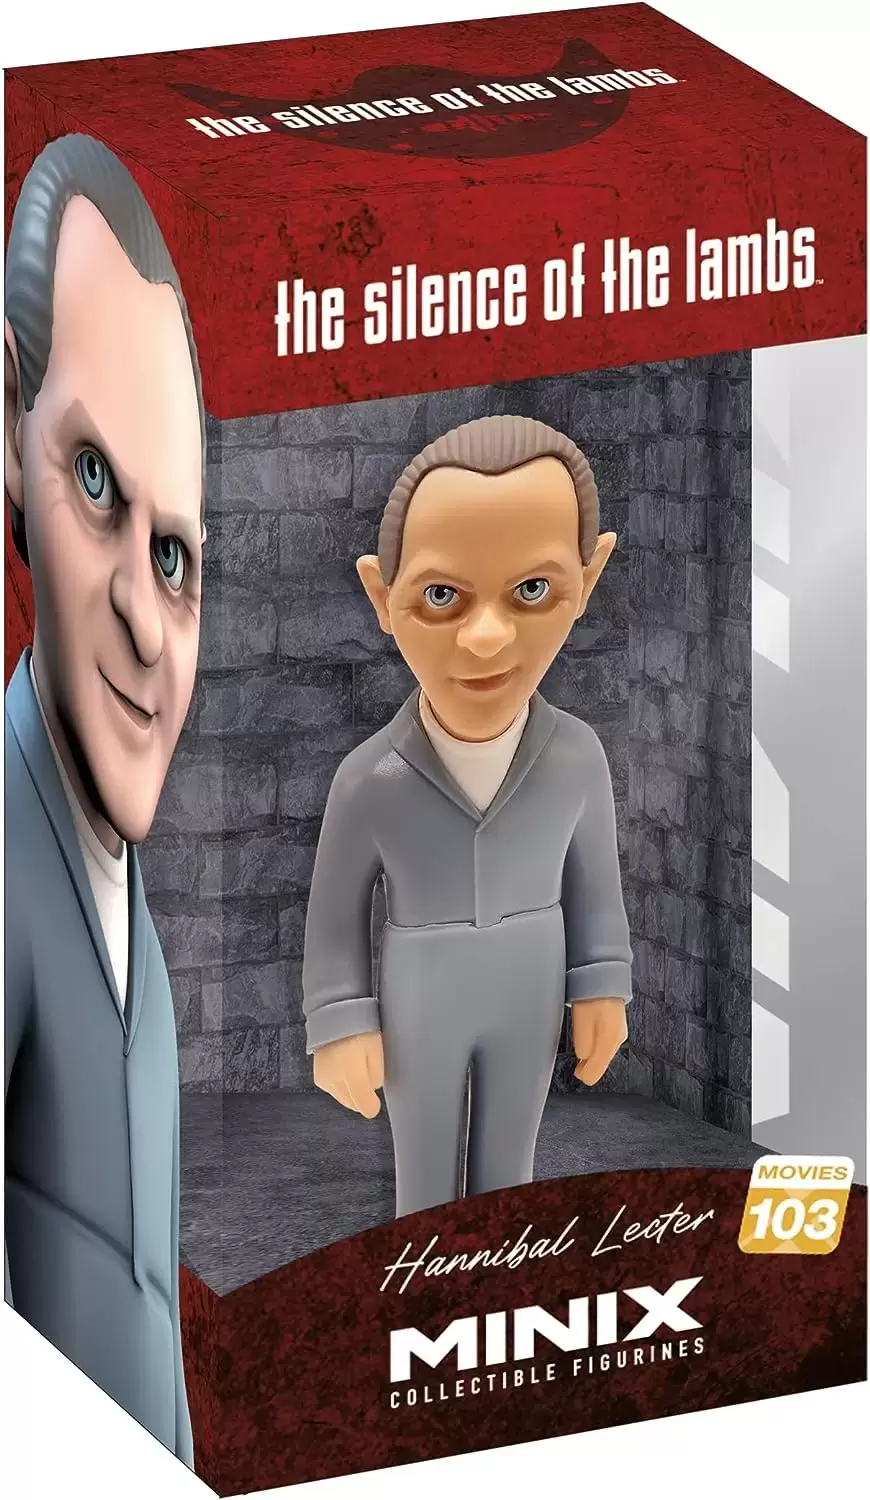 The SIlence of the Lambs - Hannibal Lecter - MINIX action figure